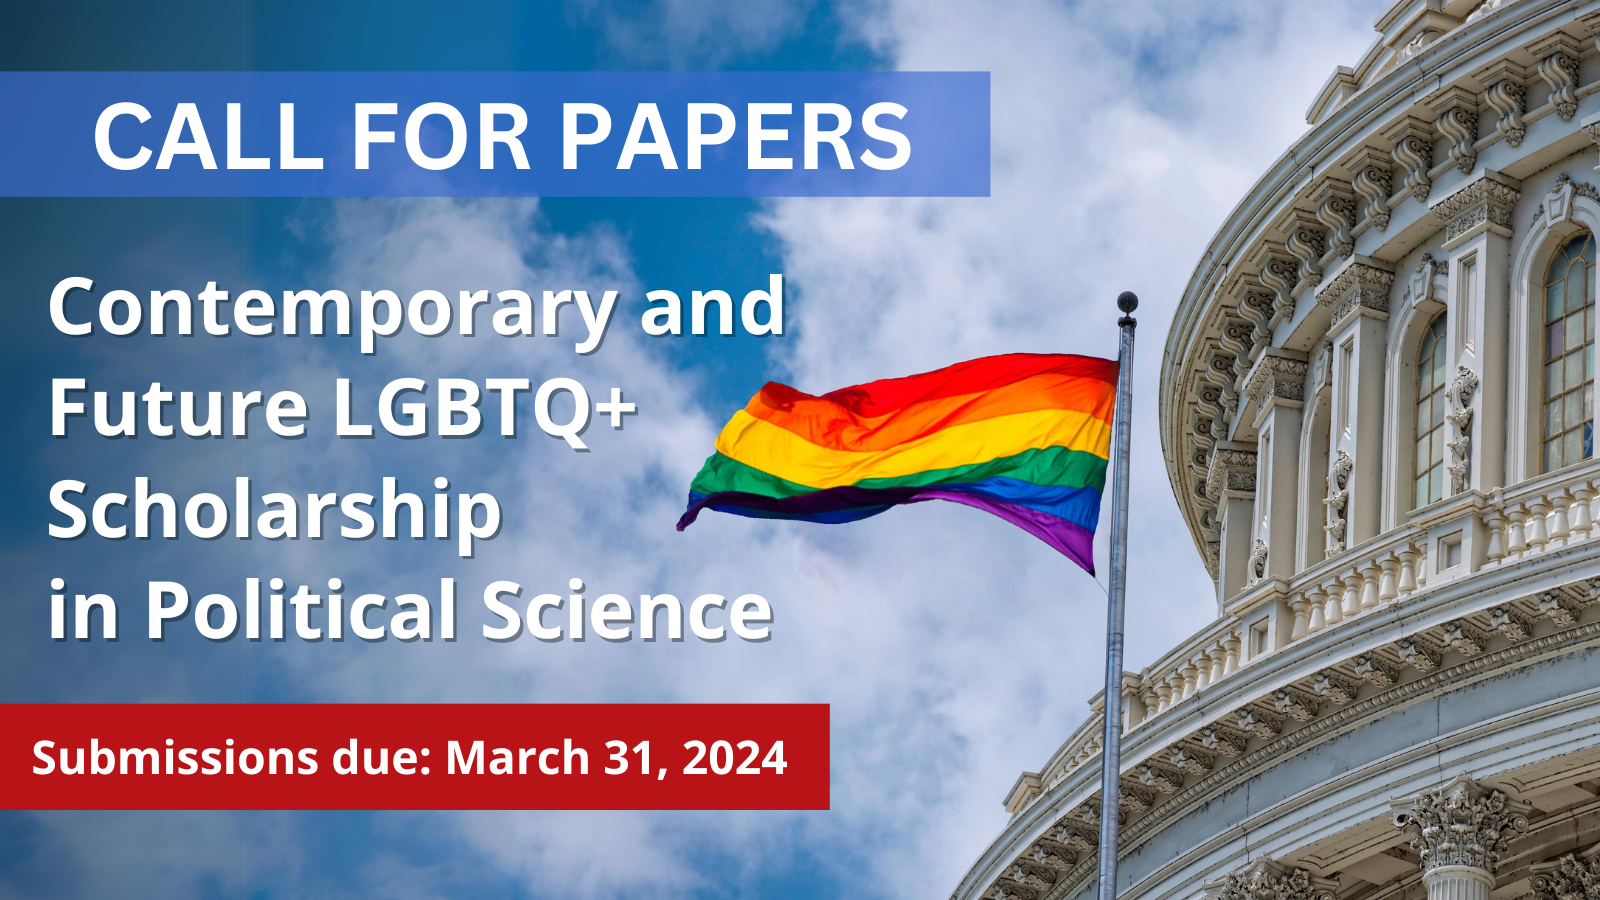 Call for Papers LGBTQ+